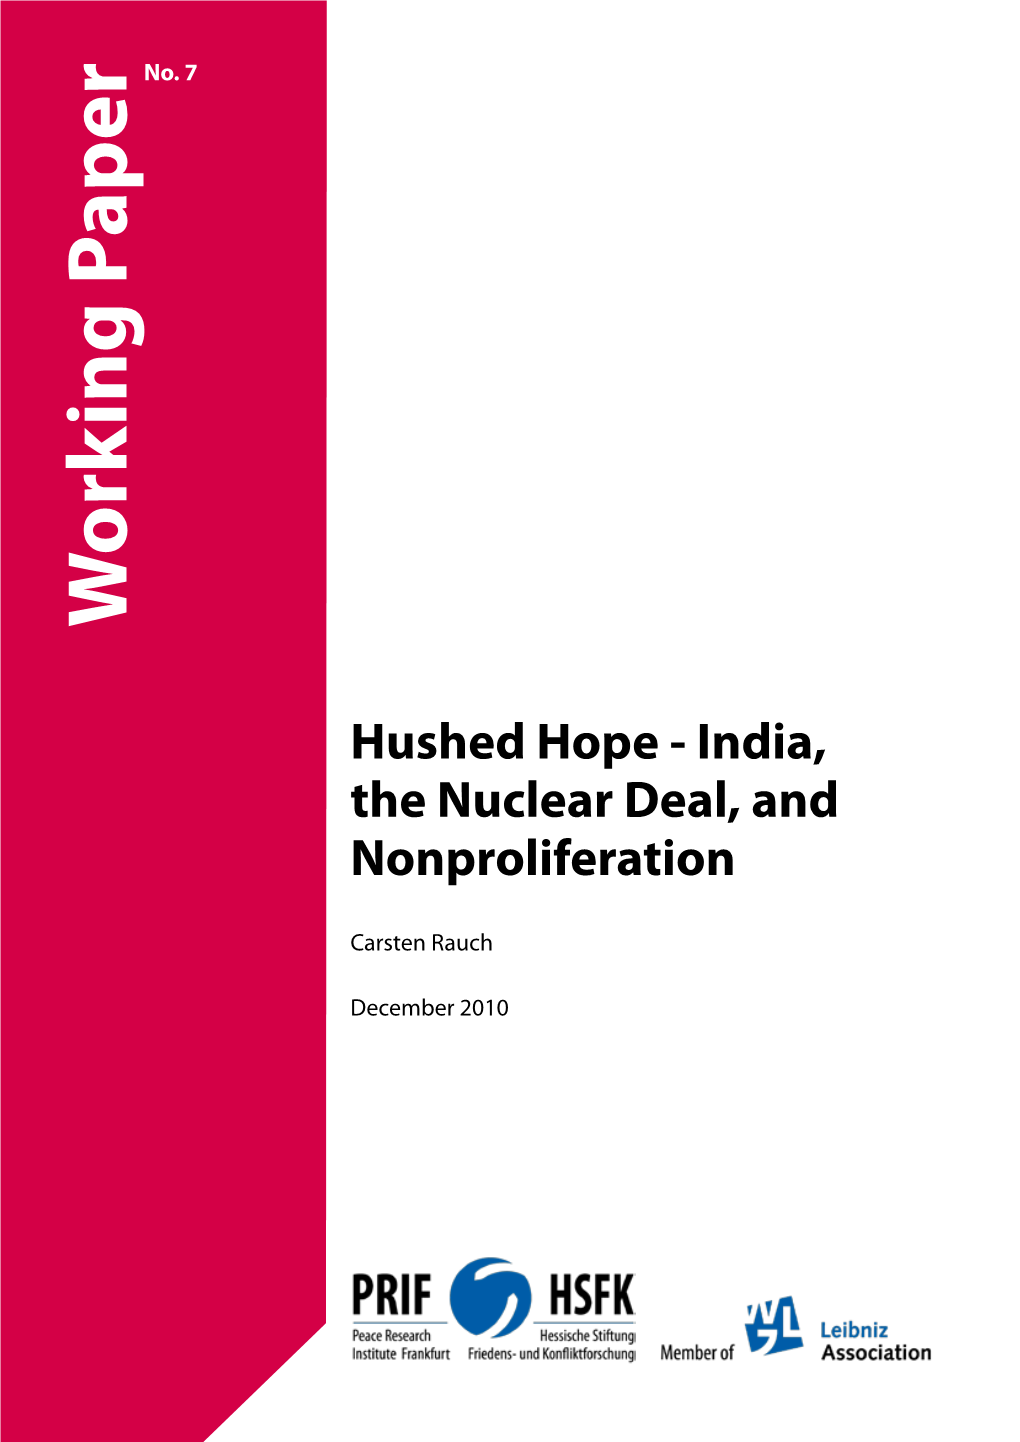 Hushed Hope - India, the Nuclear Deal, and Nonproliferation